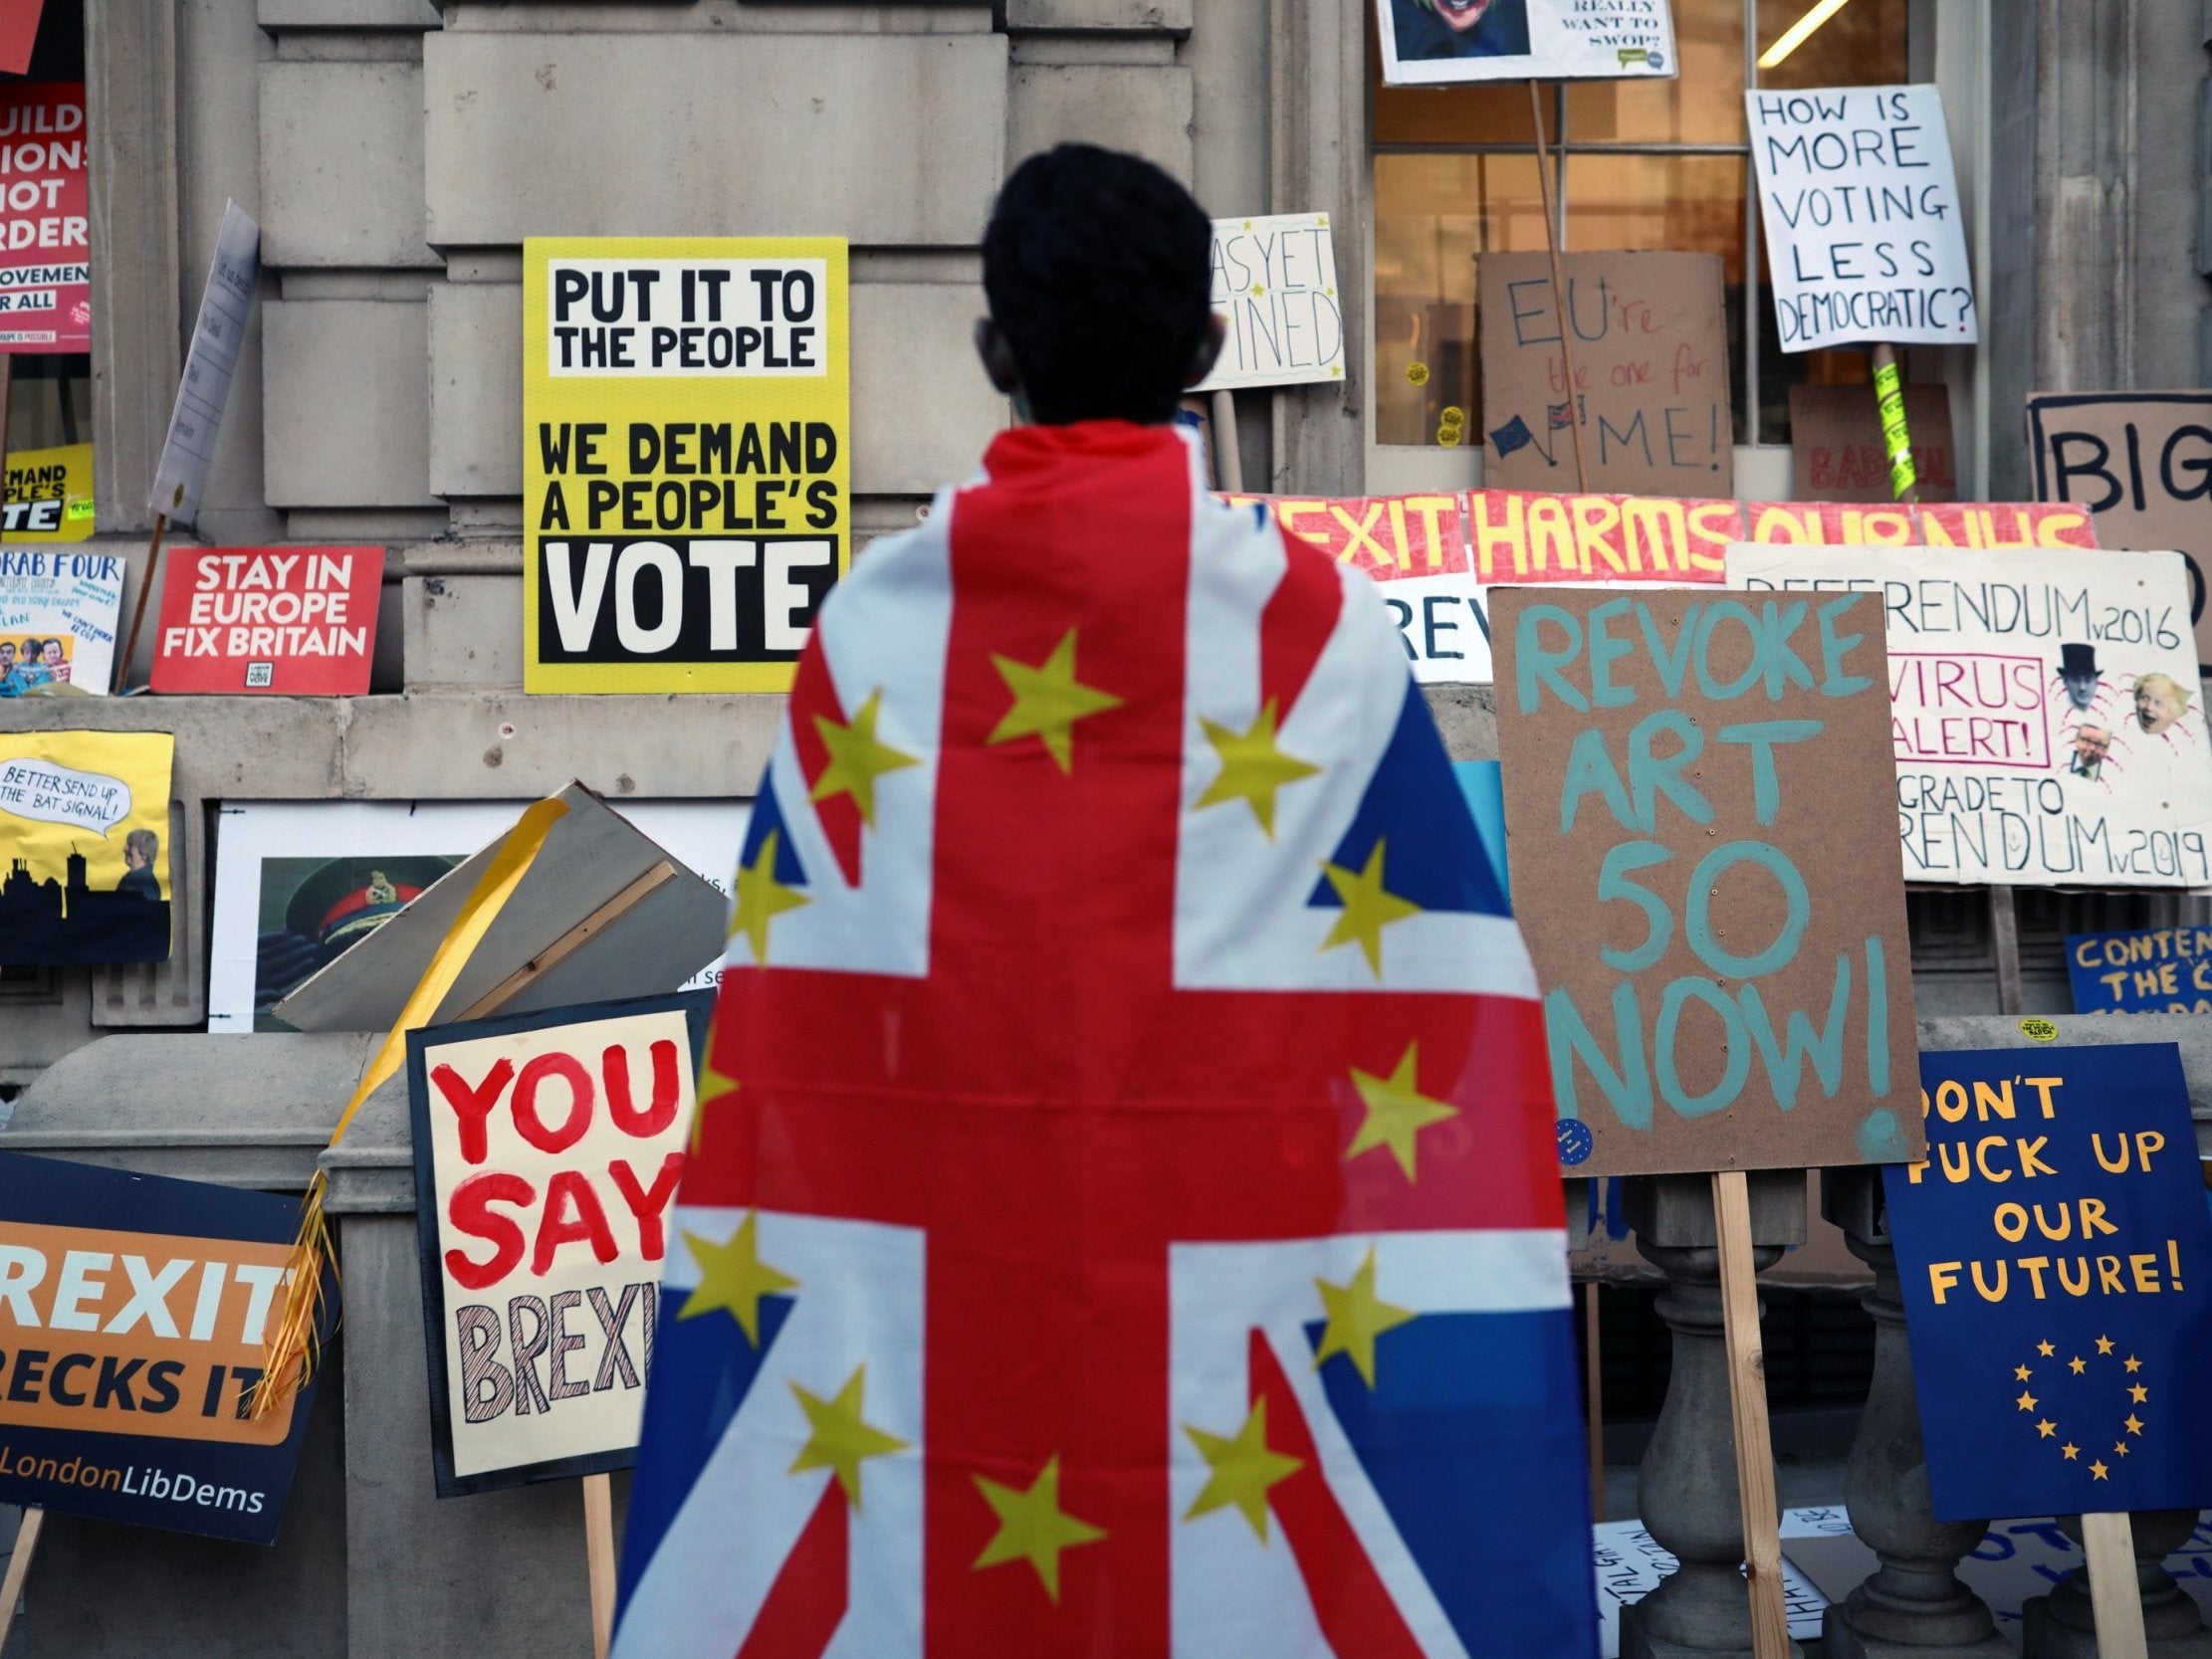 Brexit and austerity: a toxic mix that has decimated the life chances of a whole generation